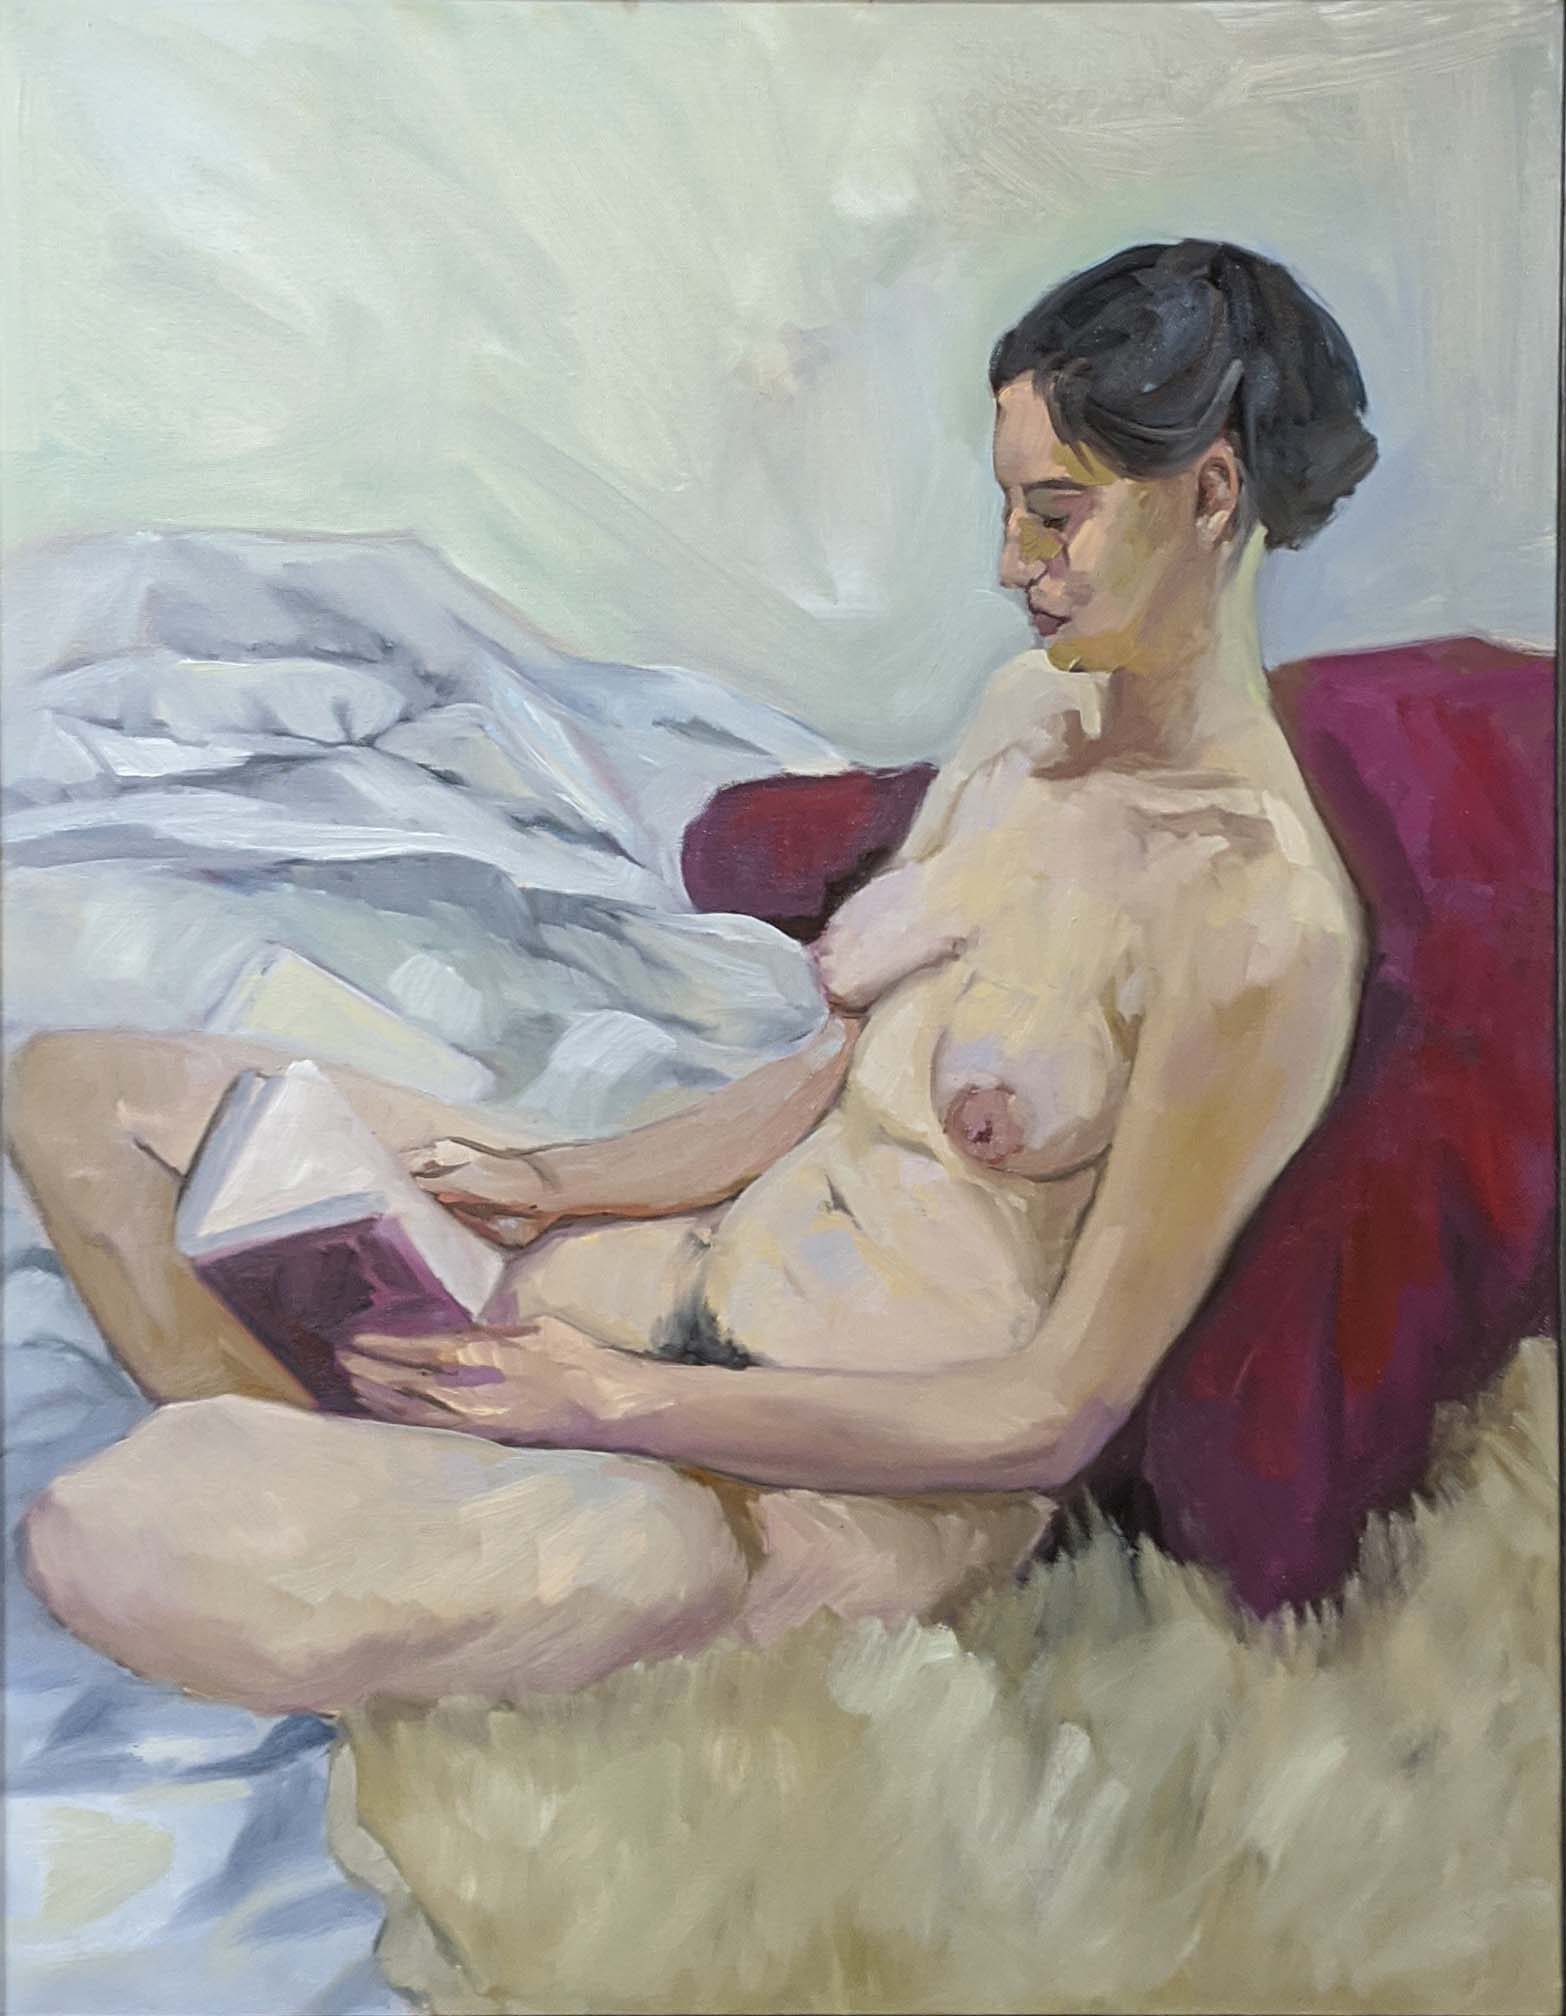 Michelle Reading, oil on linen, 24X30, $3,478.00 framed, includes shipping and handling in continental US.